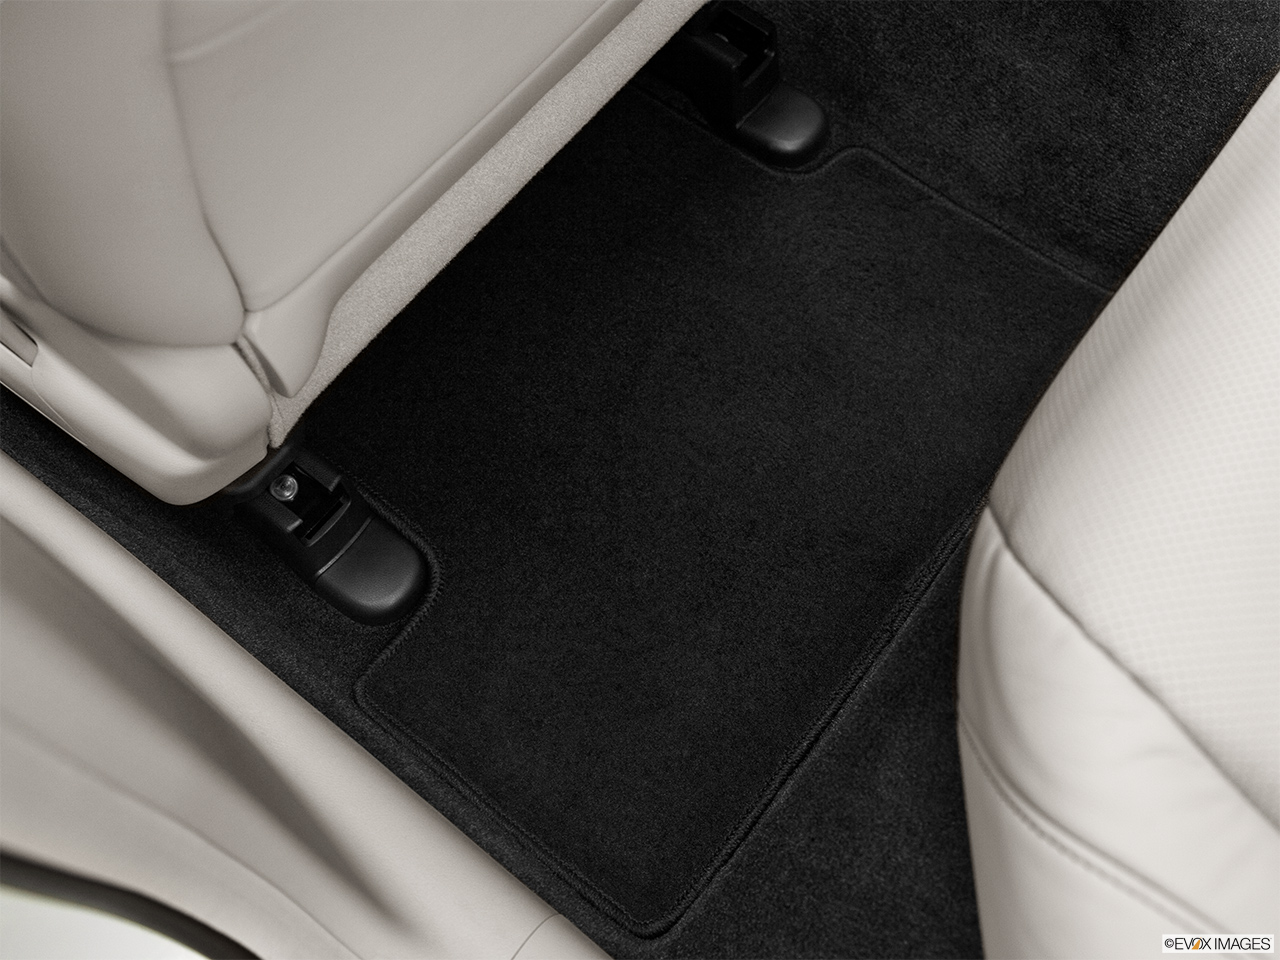 2012 Acura TSX Base Rear driver's side floor mat. Mid-seat level from outside looking in. 